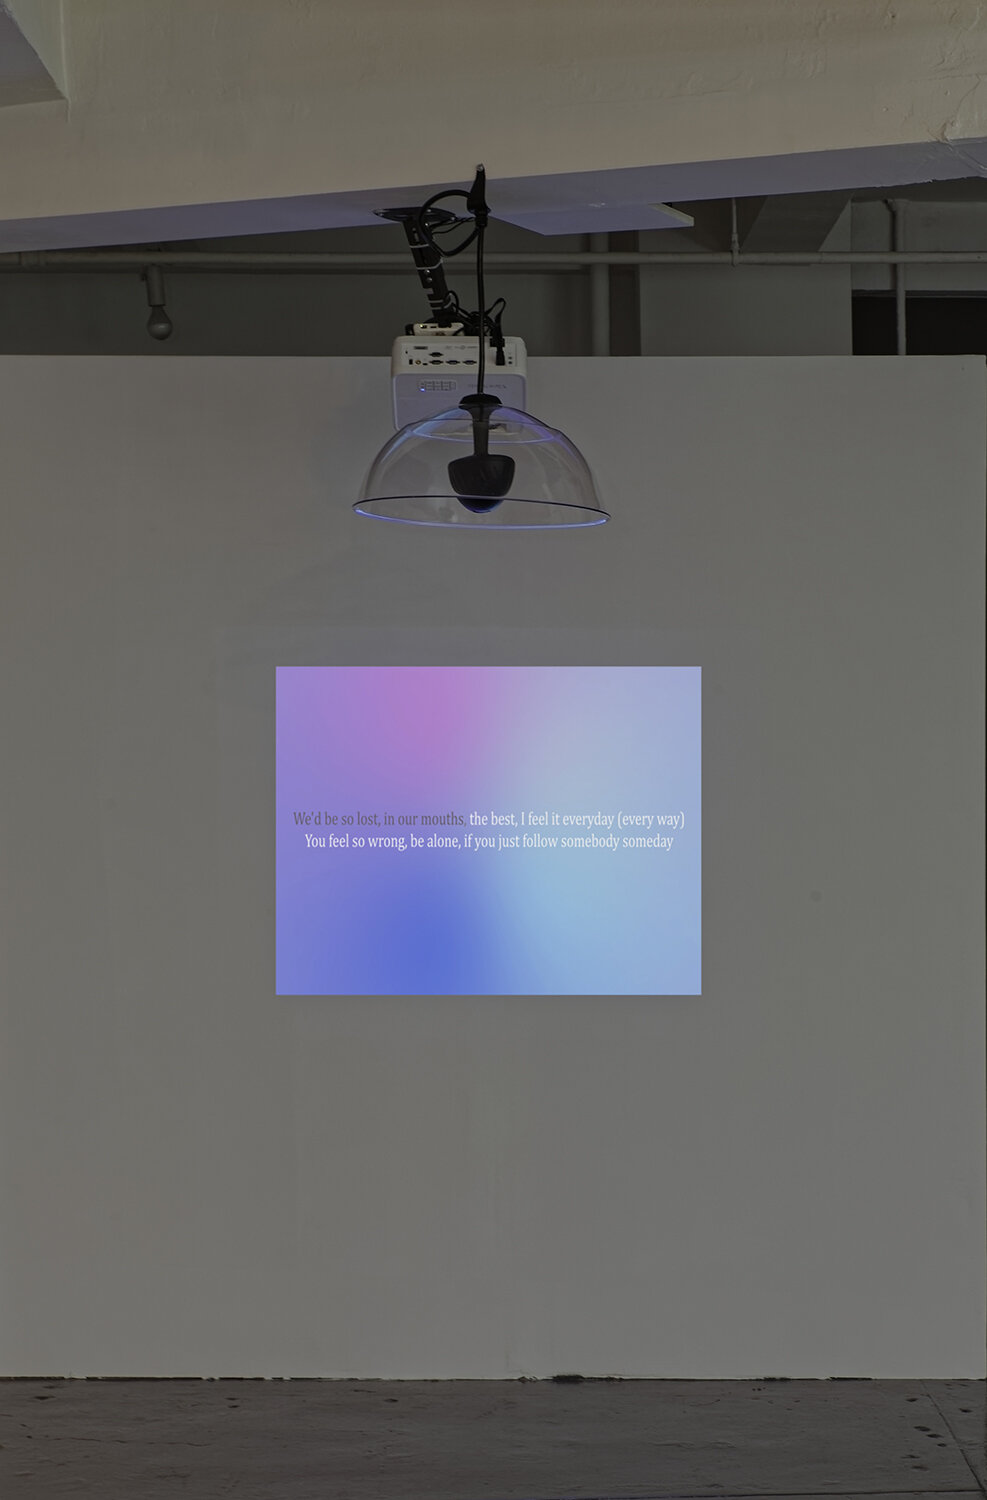  Installation view of  Soft and Wet . Work: Arooj Aftab,  Soft and Wet , 2019. Photograph by Matt Vicari 